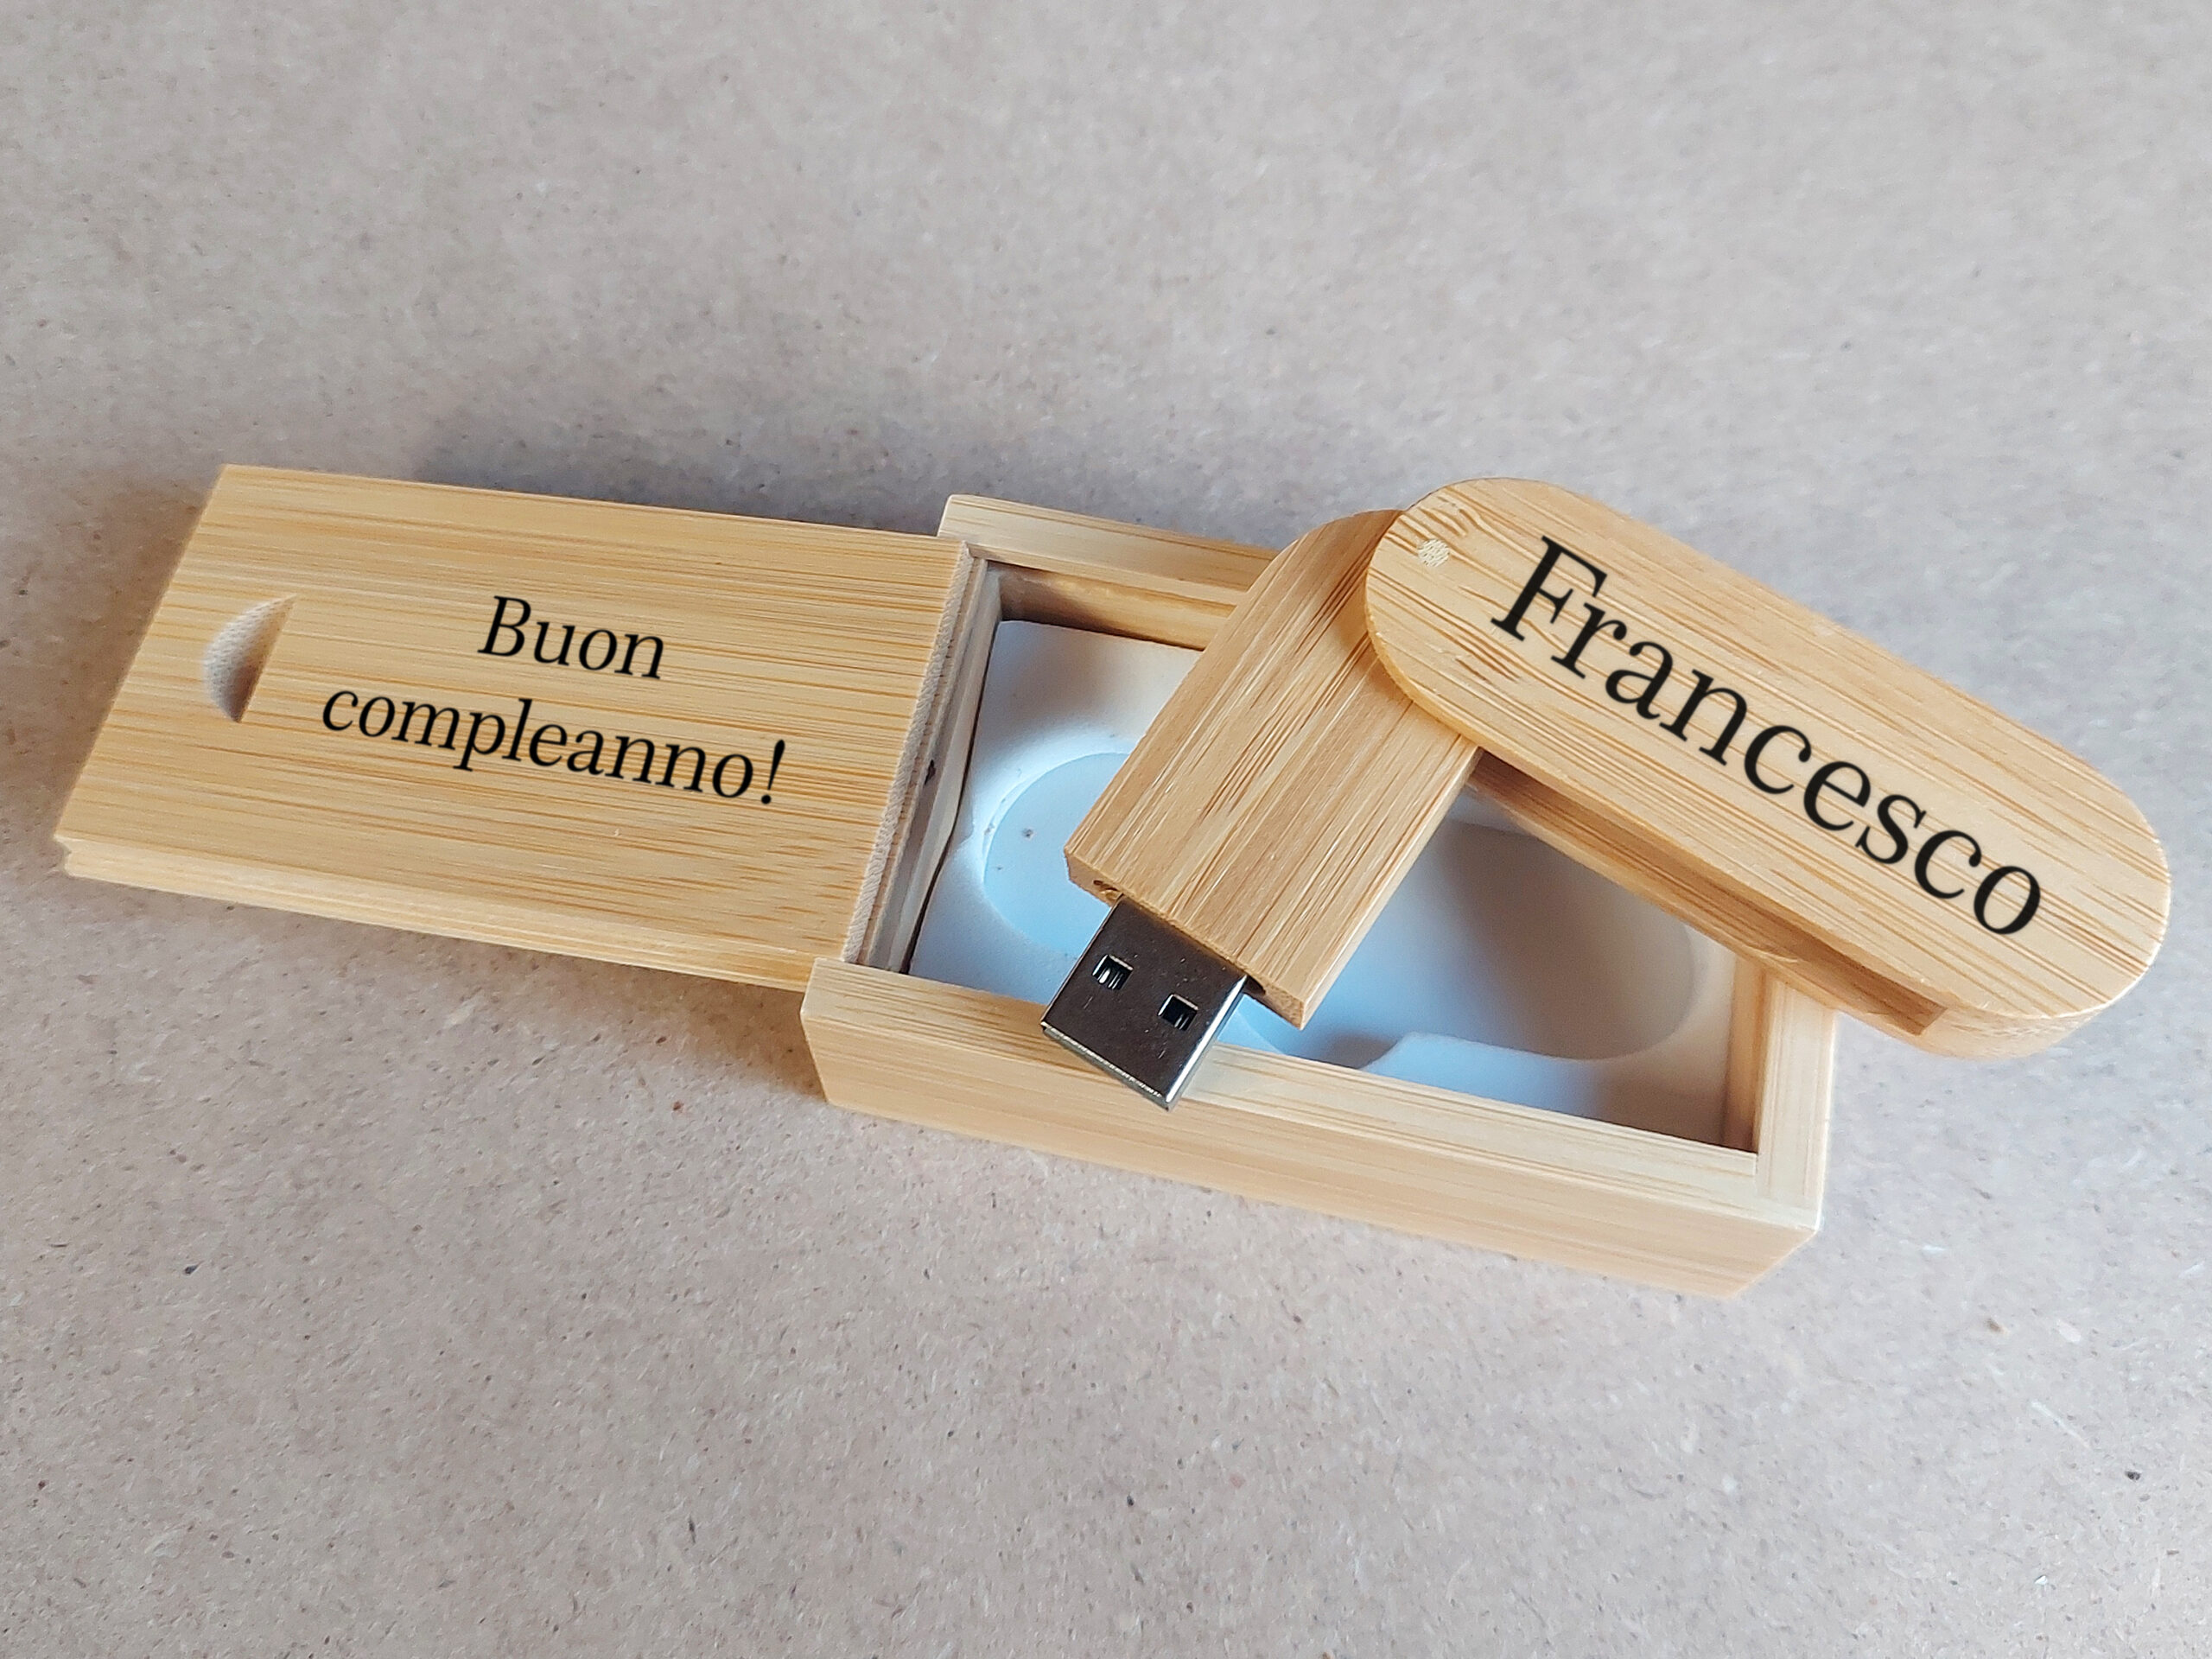 Personalized USB key with bamboo case